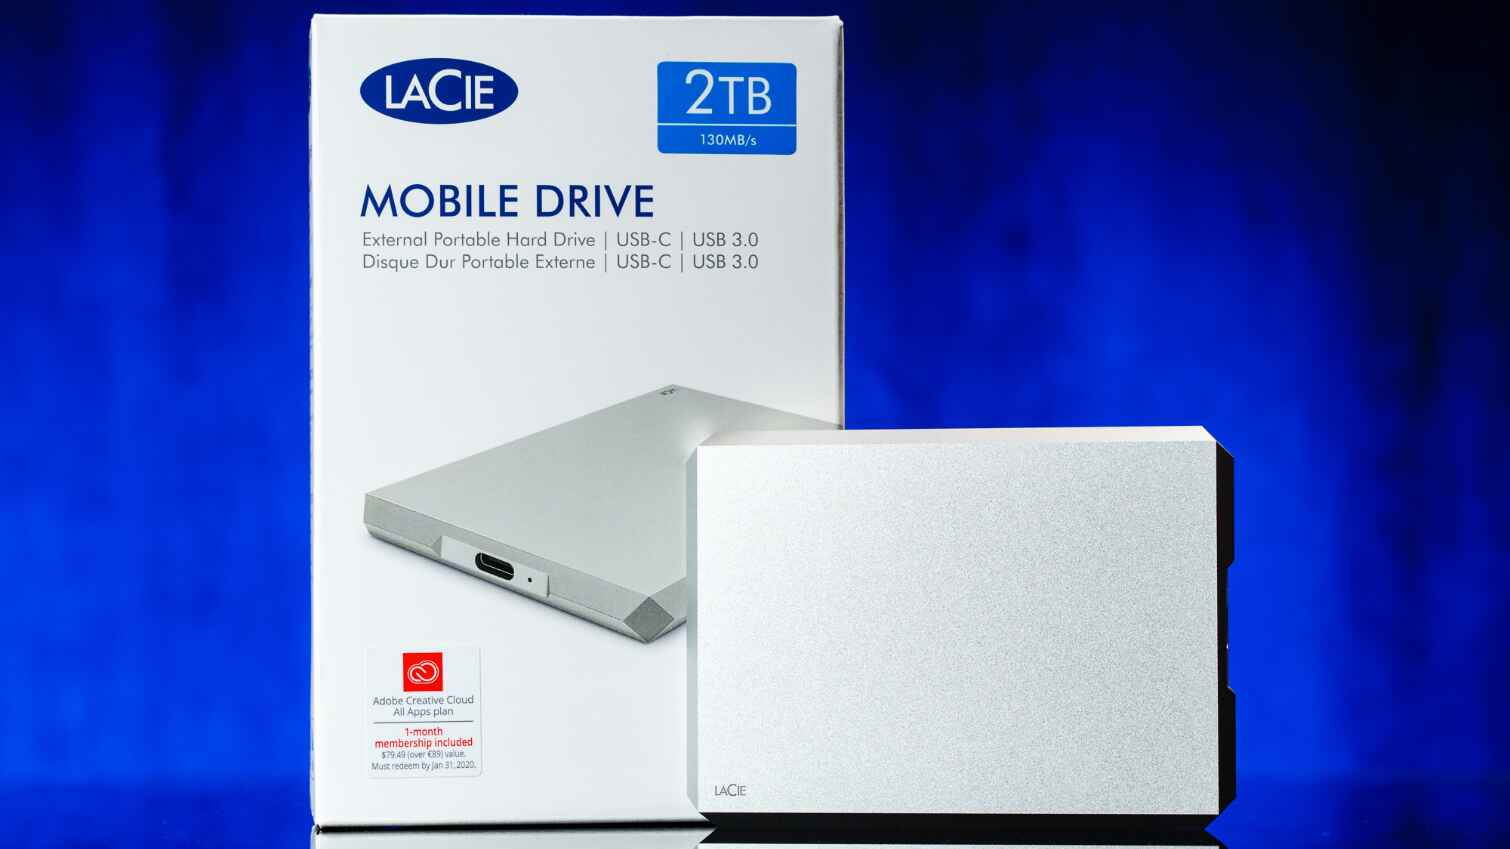 What Is The Speed Of The Hard Disk Drive Used In The Aluminum LaCie 2TB USB3 Portable Drive?